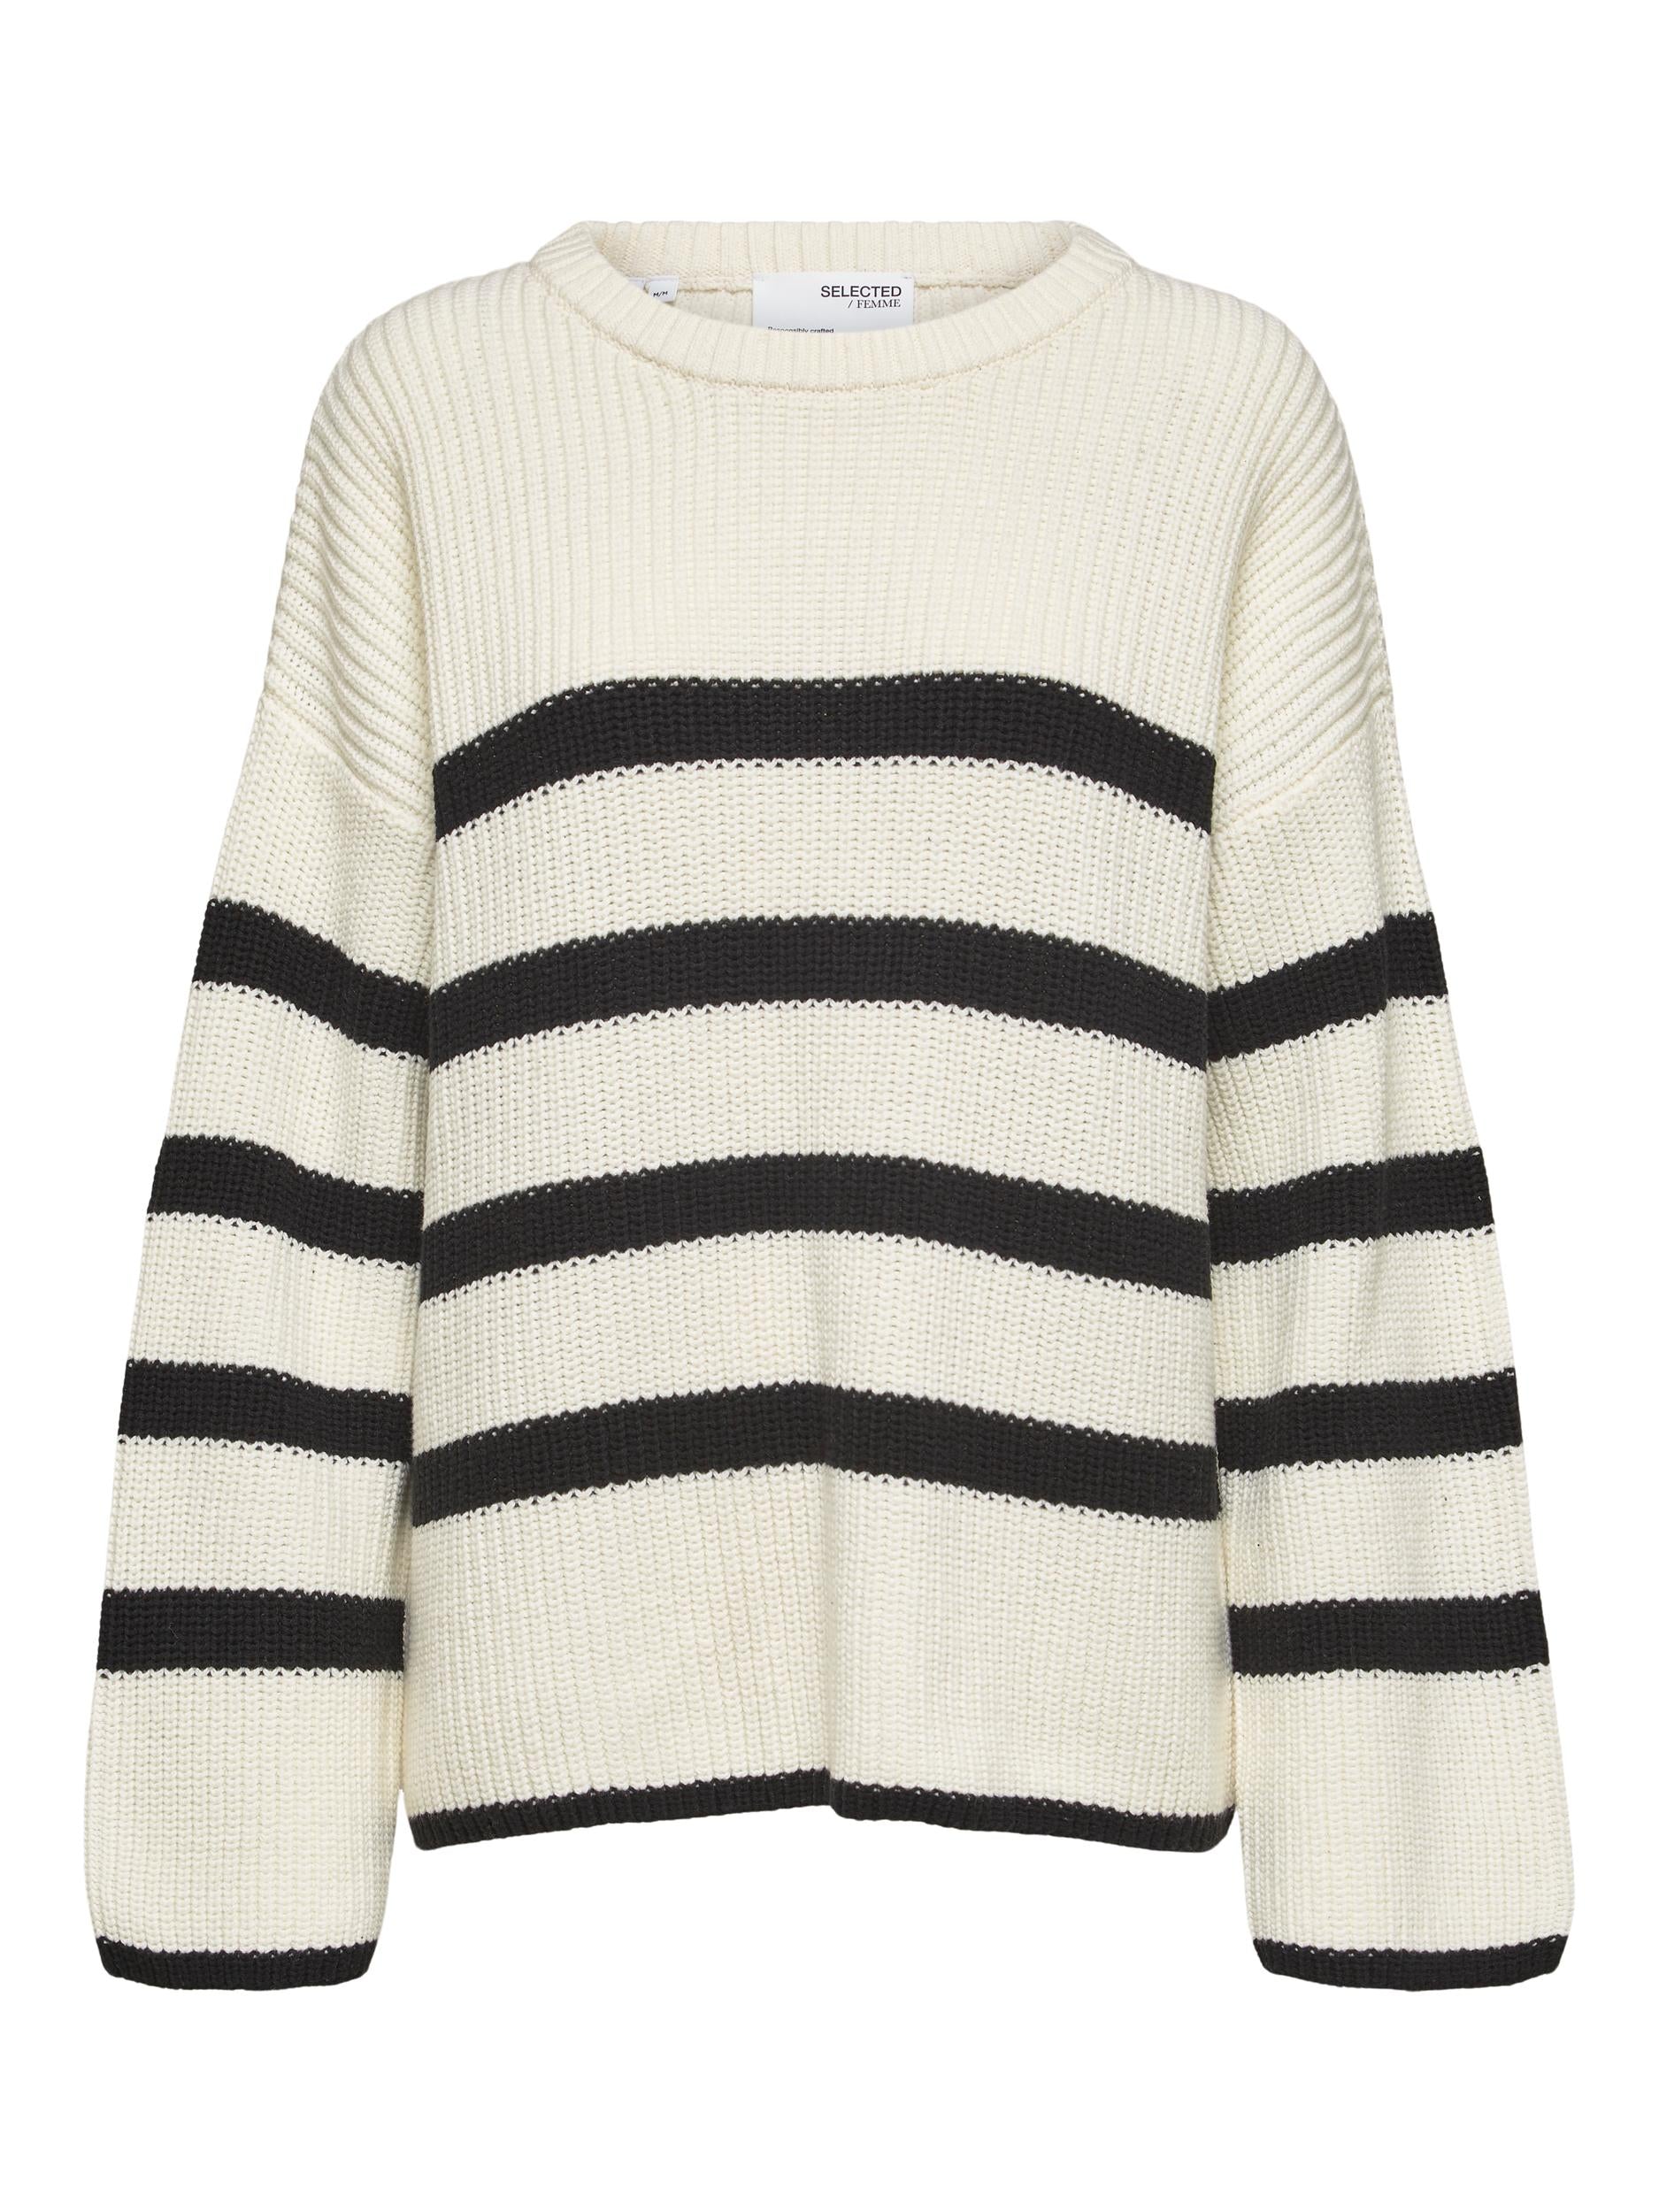 Selected Femme "Bloomie" Knit O-Neck weiss